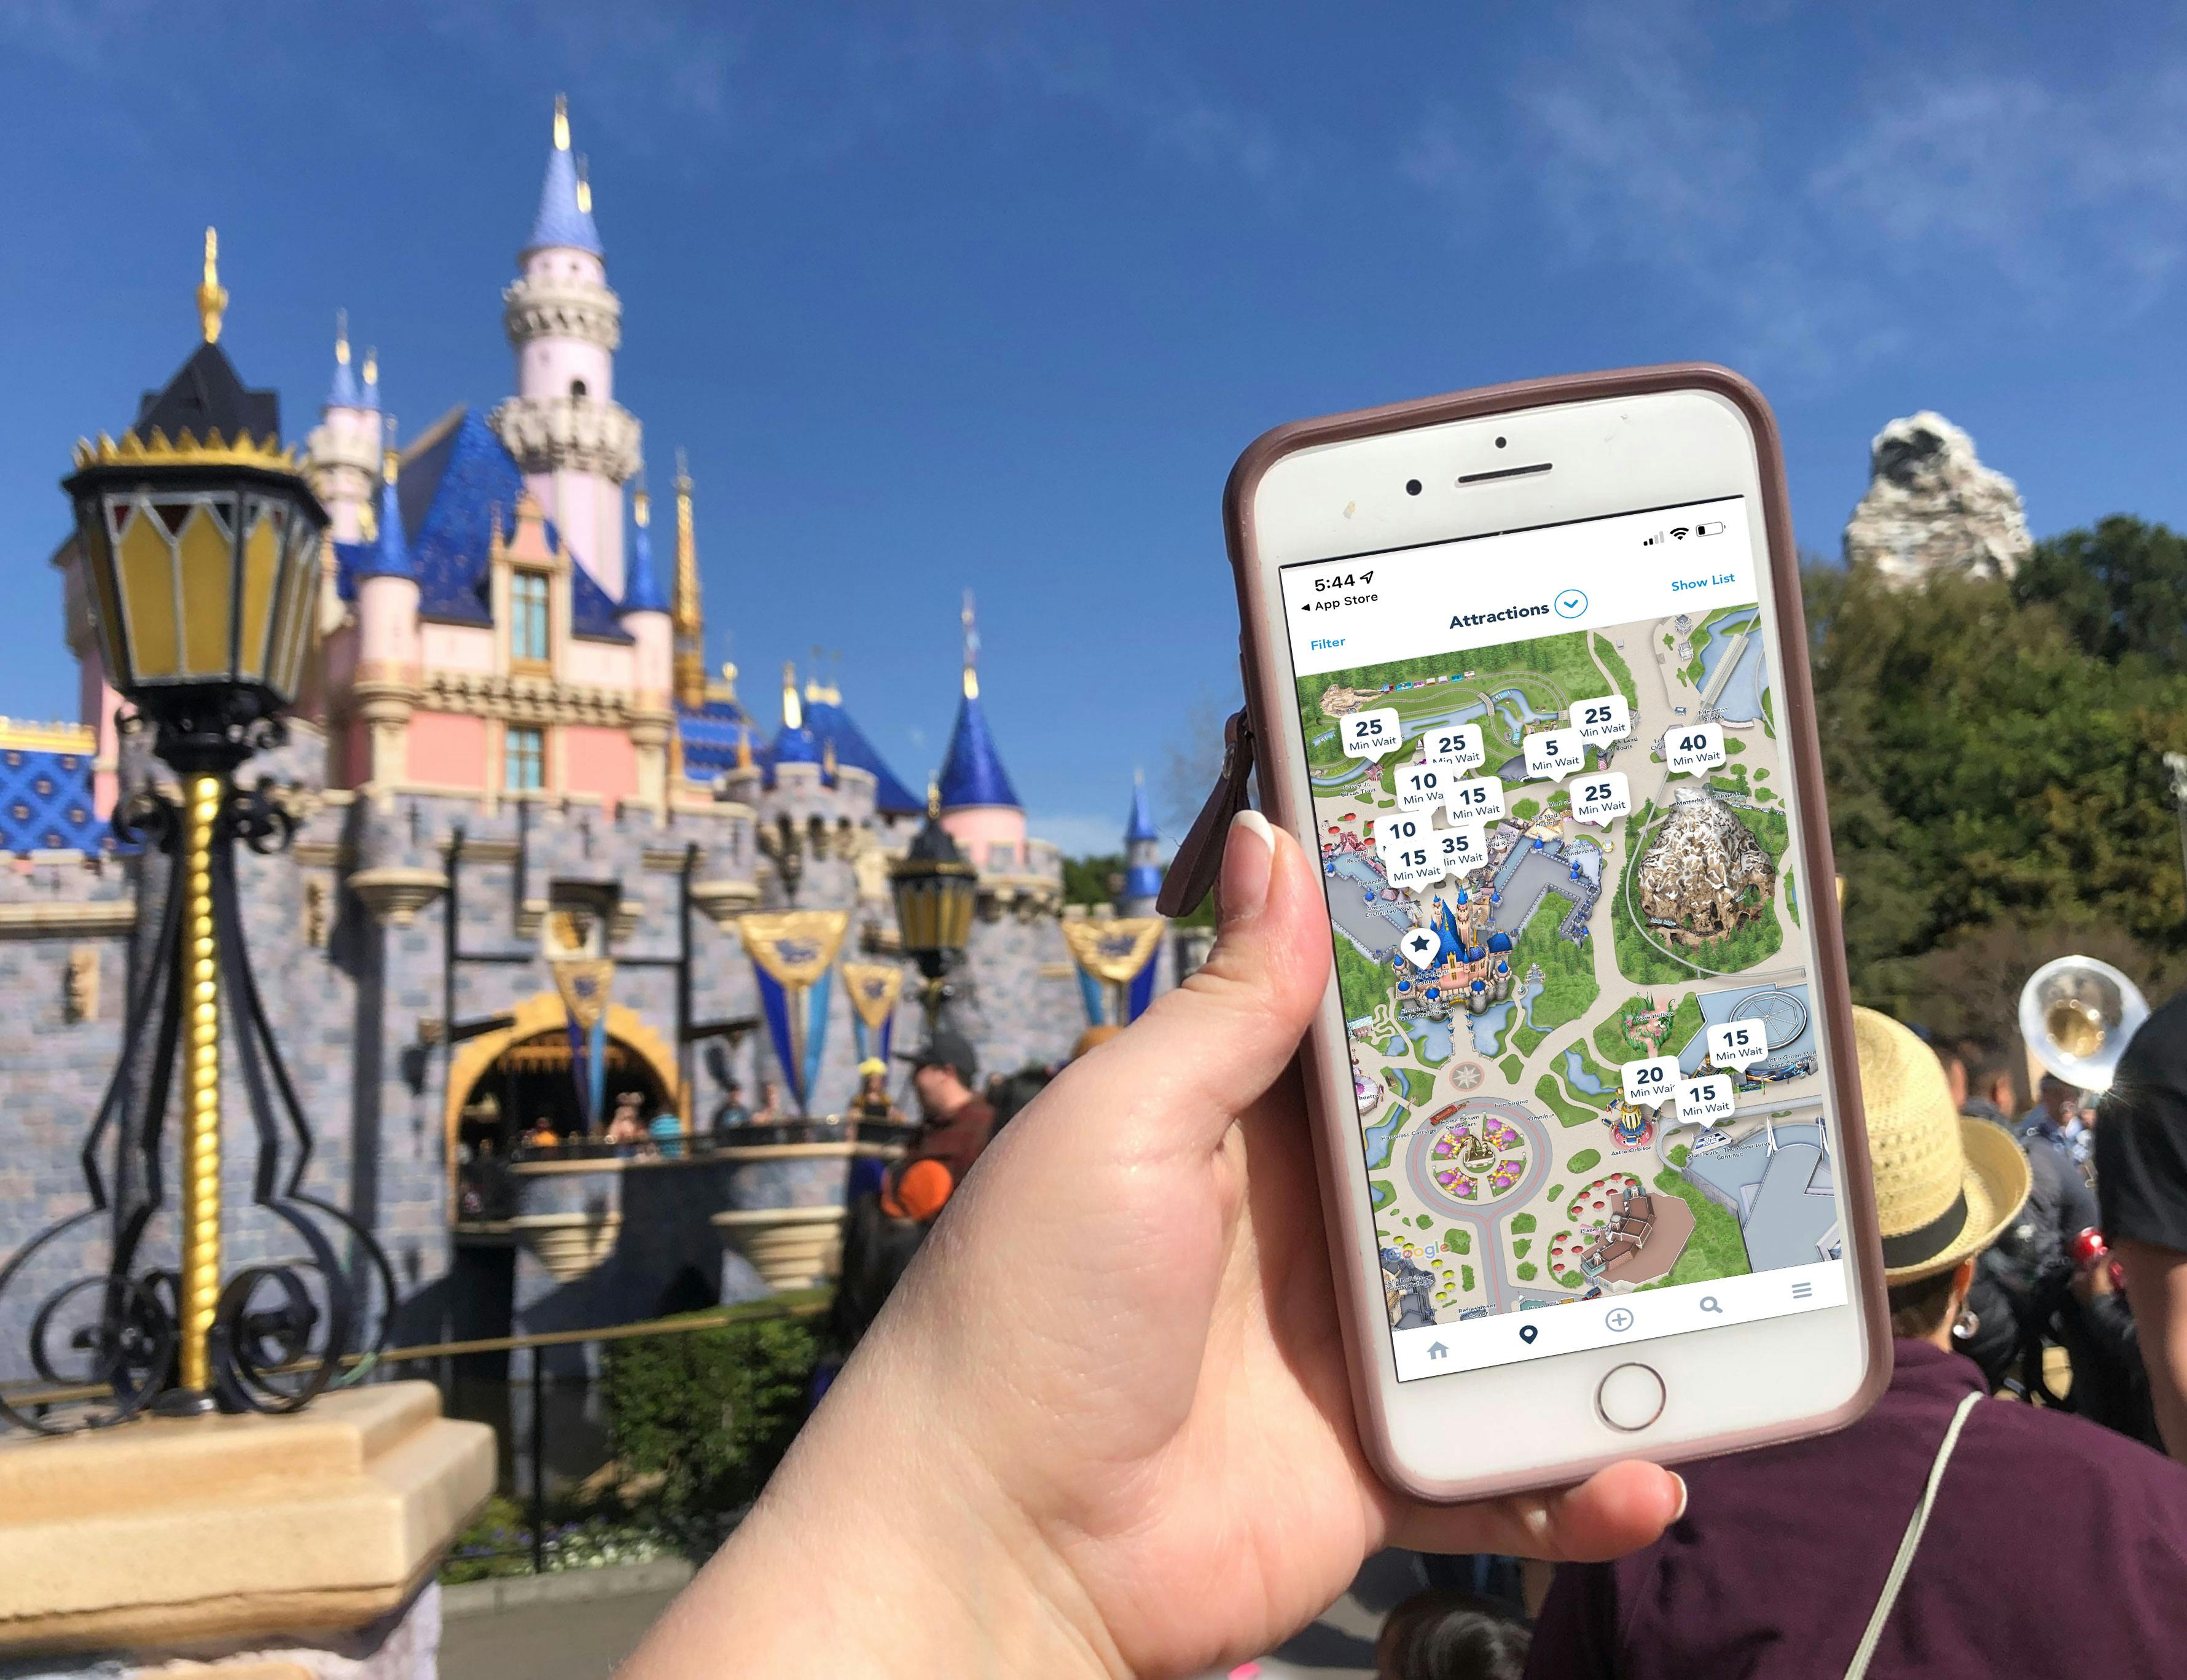 Disneyland app with wait times on map